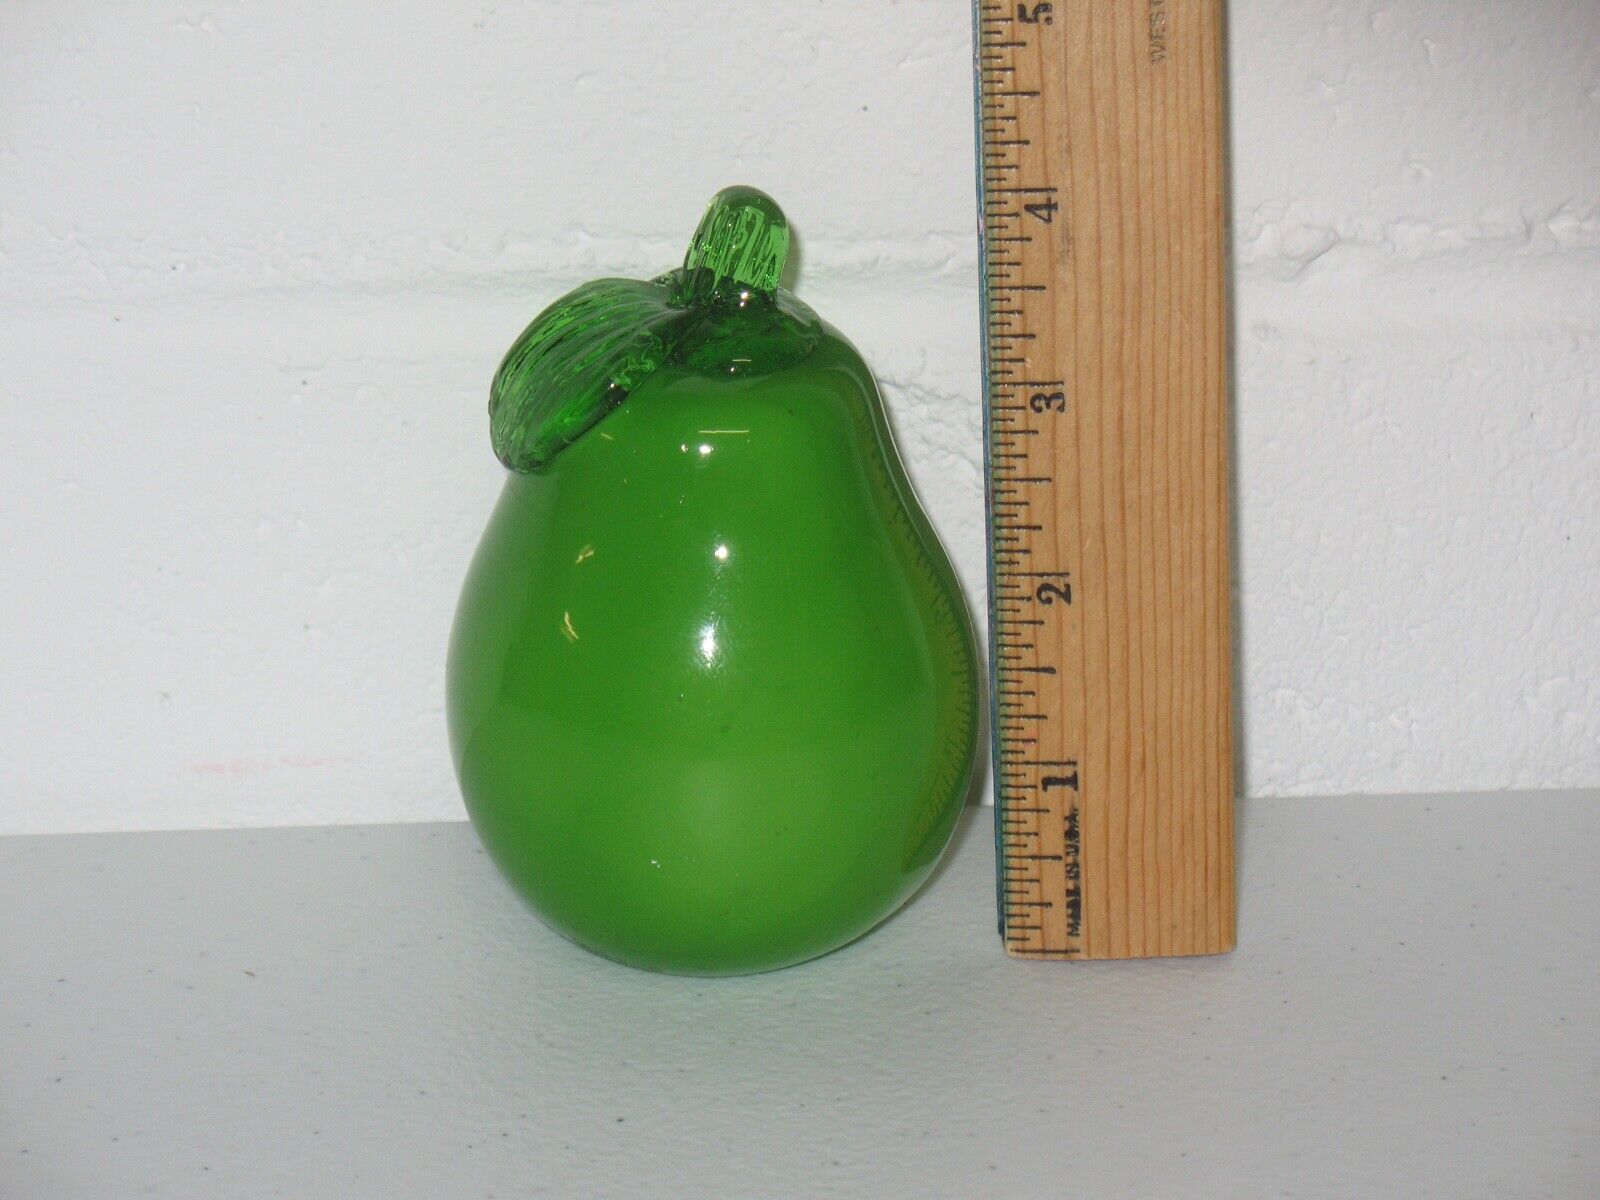 Murano Art Style Vintage Glass Fruit Green Pear Unbranded Retro MCM Antique - $13.49